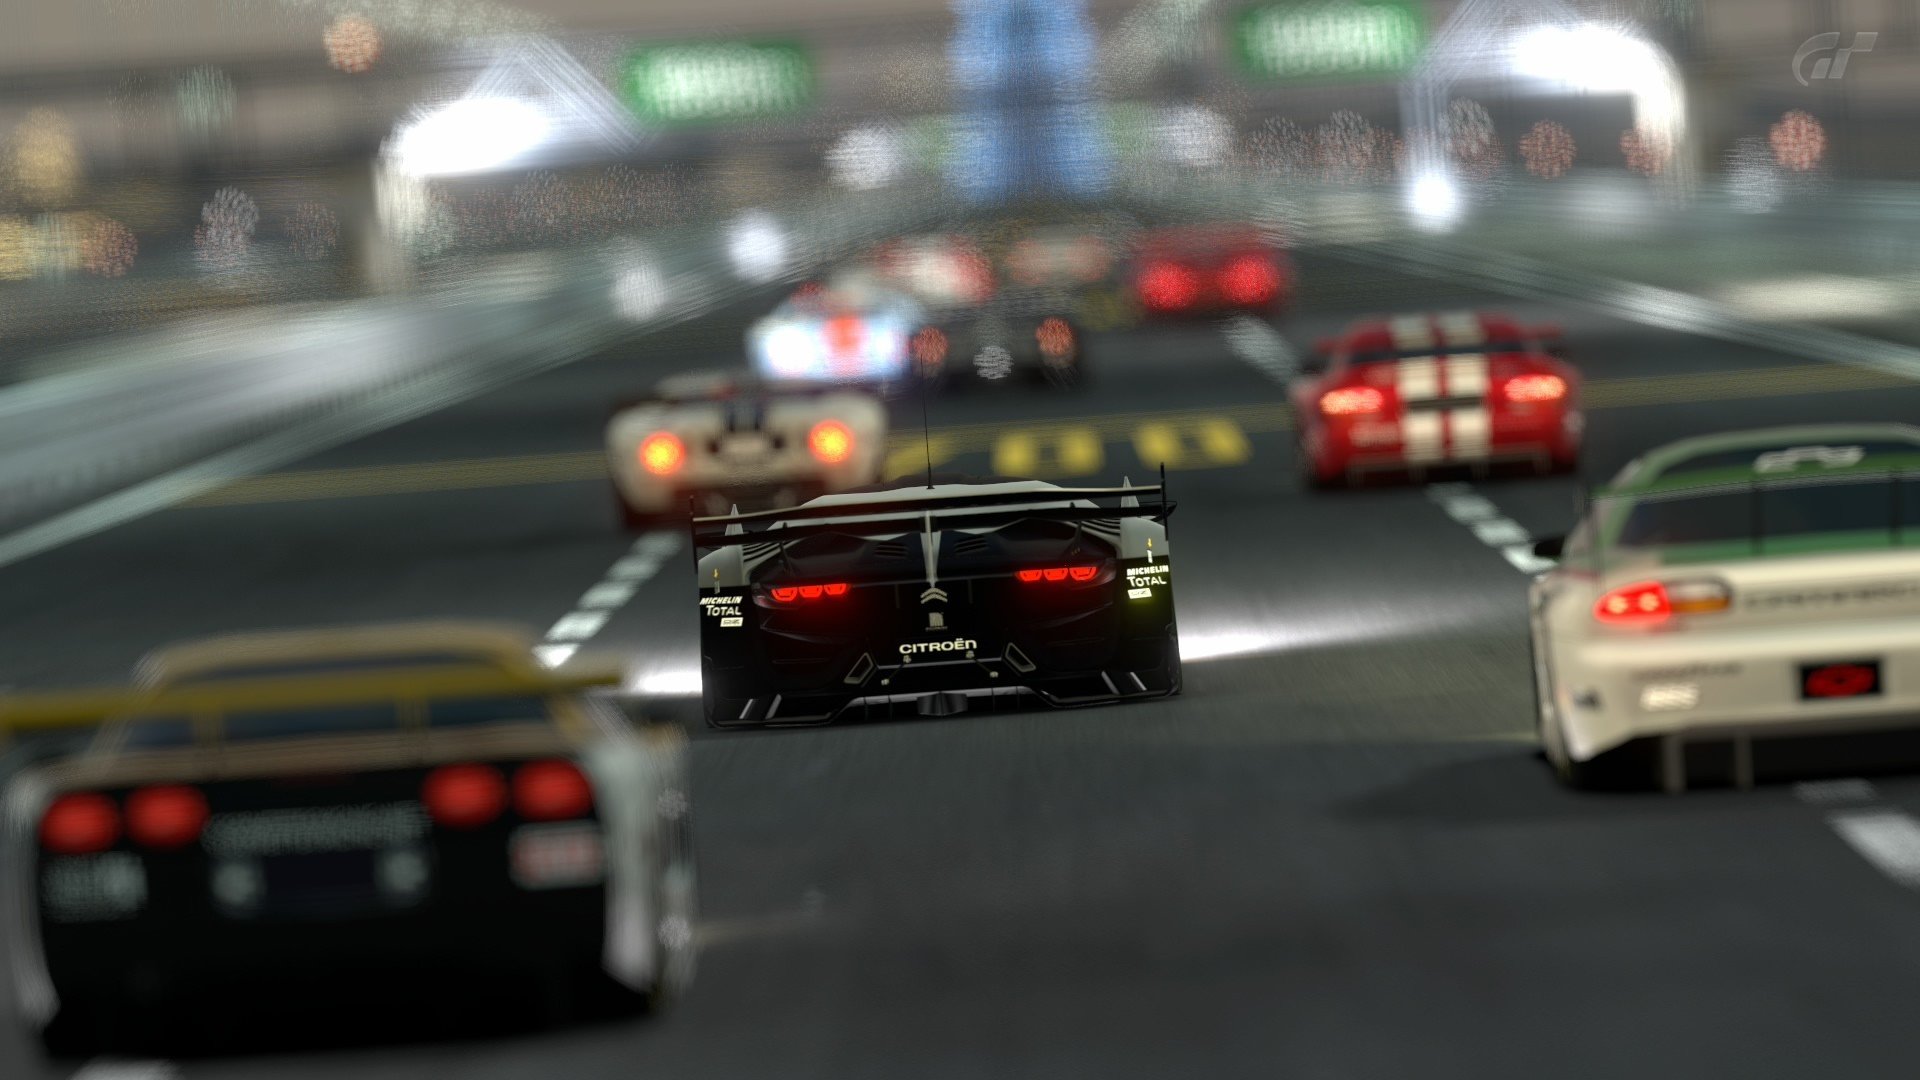 video-games-cars-vehicles-gran-turismo-5-playstation-3-gt-by-citroaia-wallpapers-hd